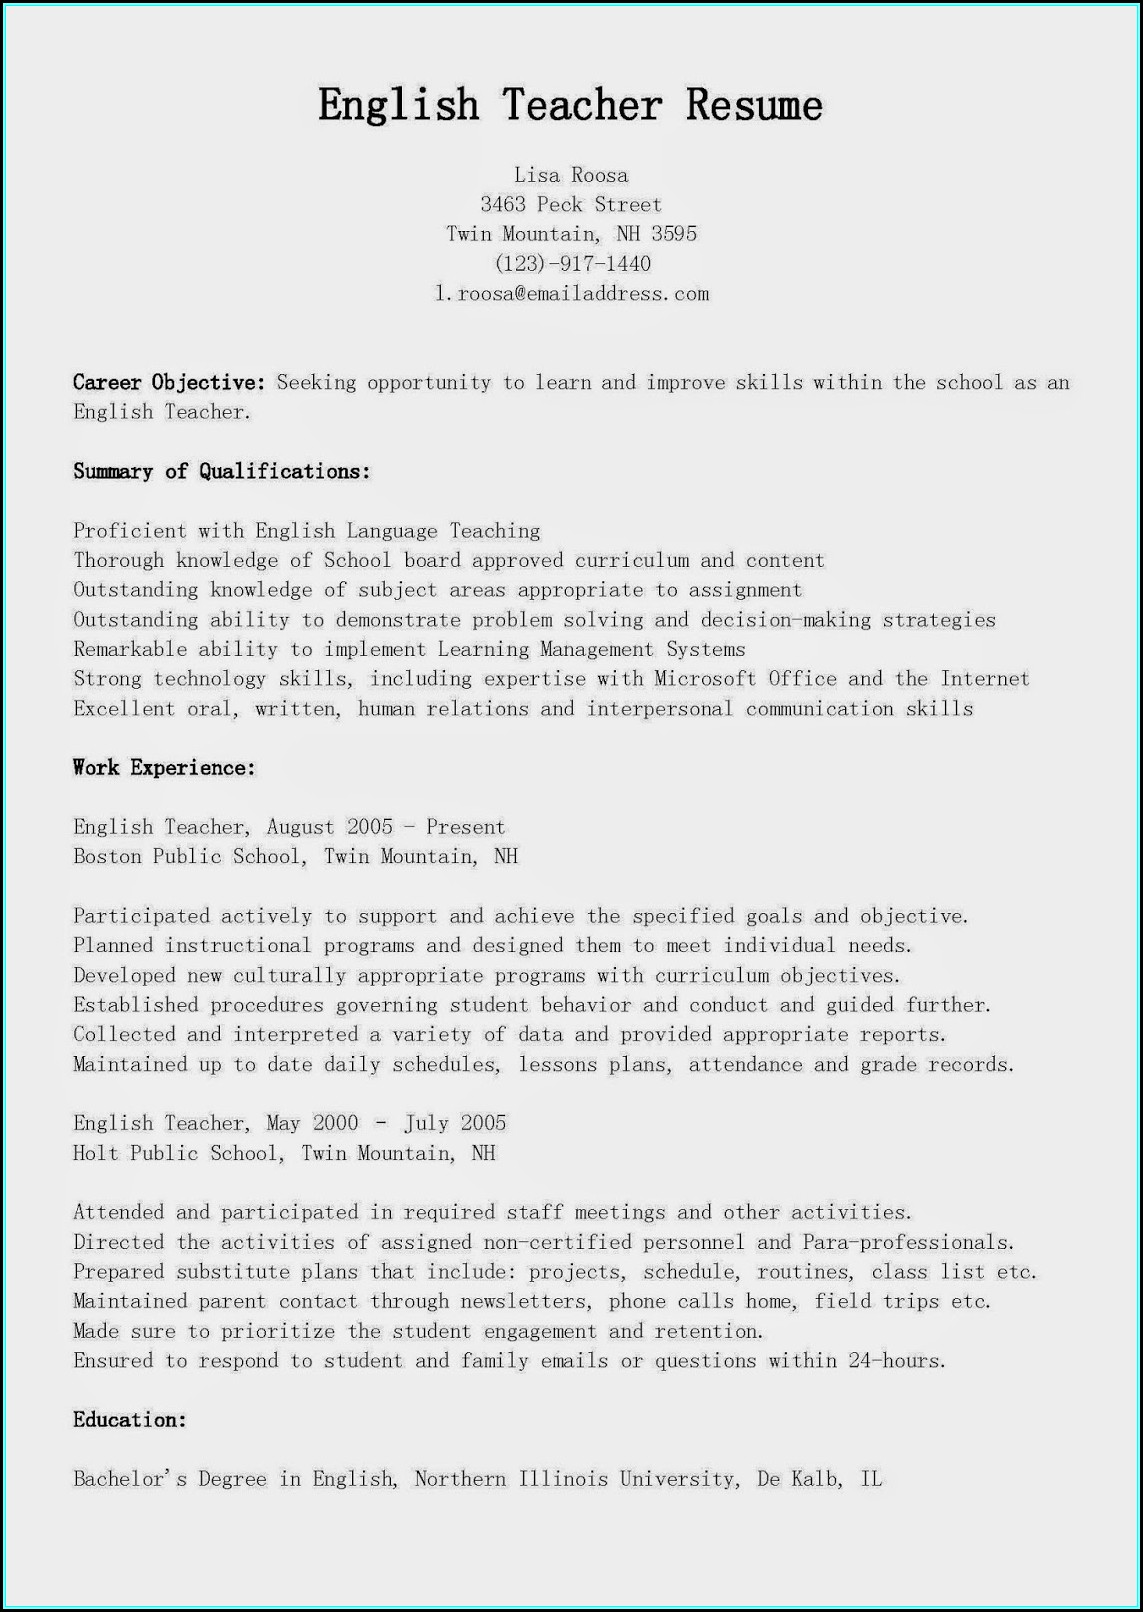 Technical Report Writing Resume